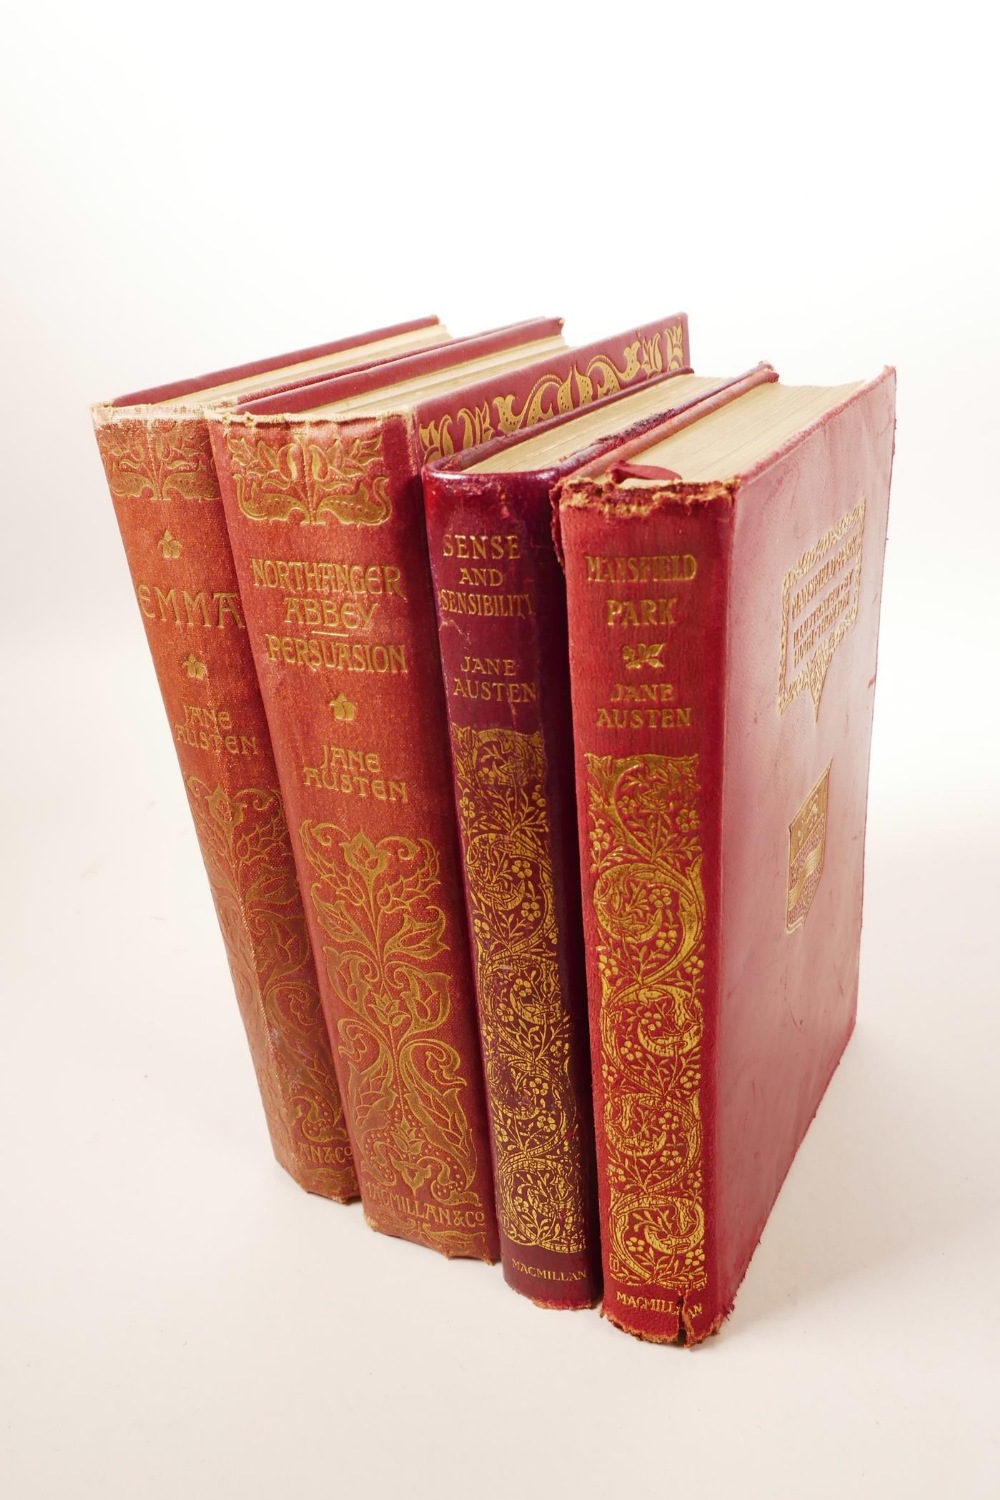 Of Jane Austen interest: Two volumes of the Peacock Edition of Jane Austen, (1775-1817), ' - Image 9 of 9